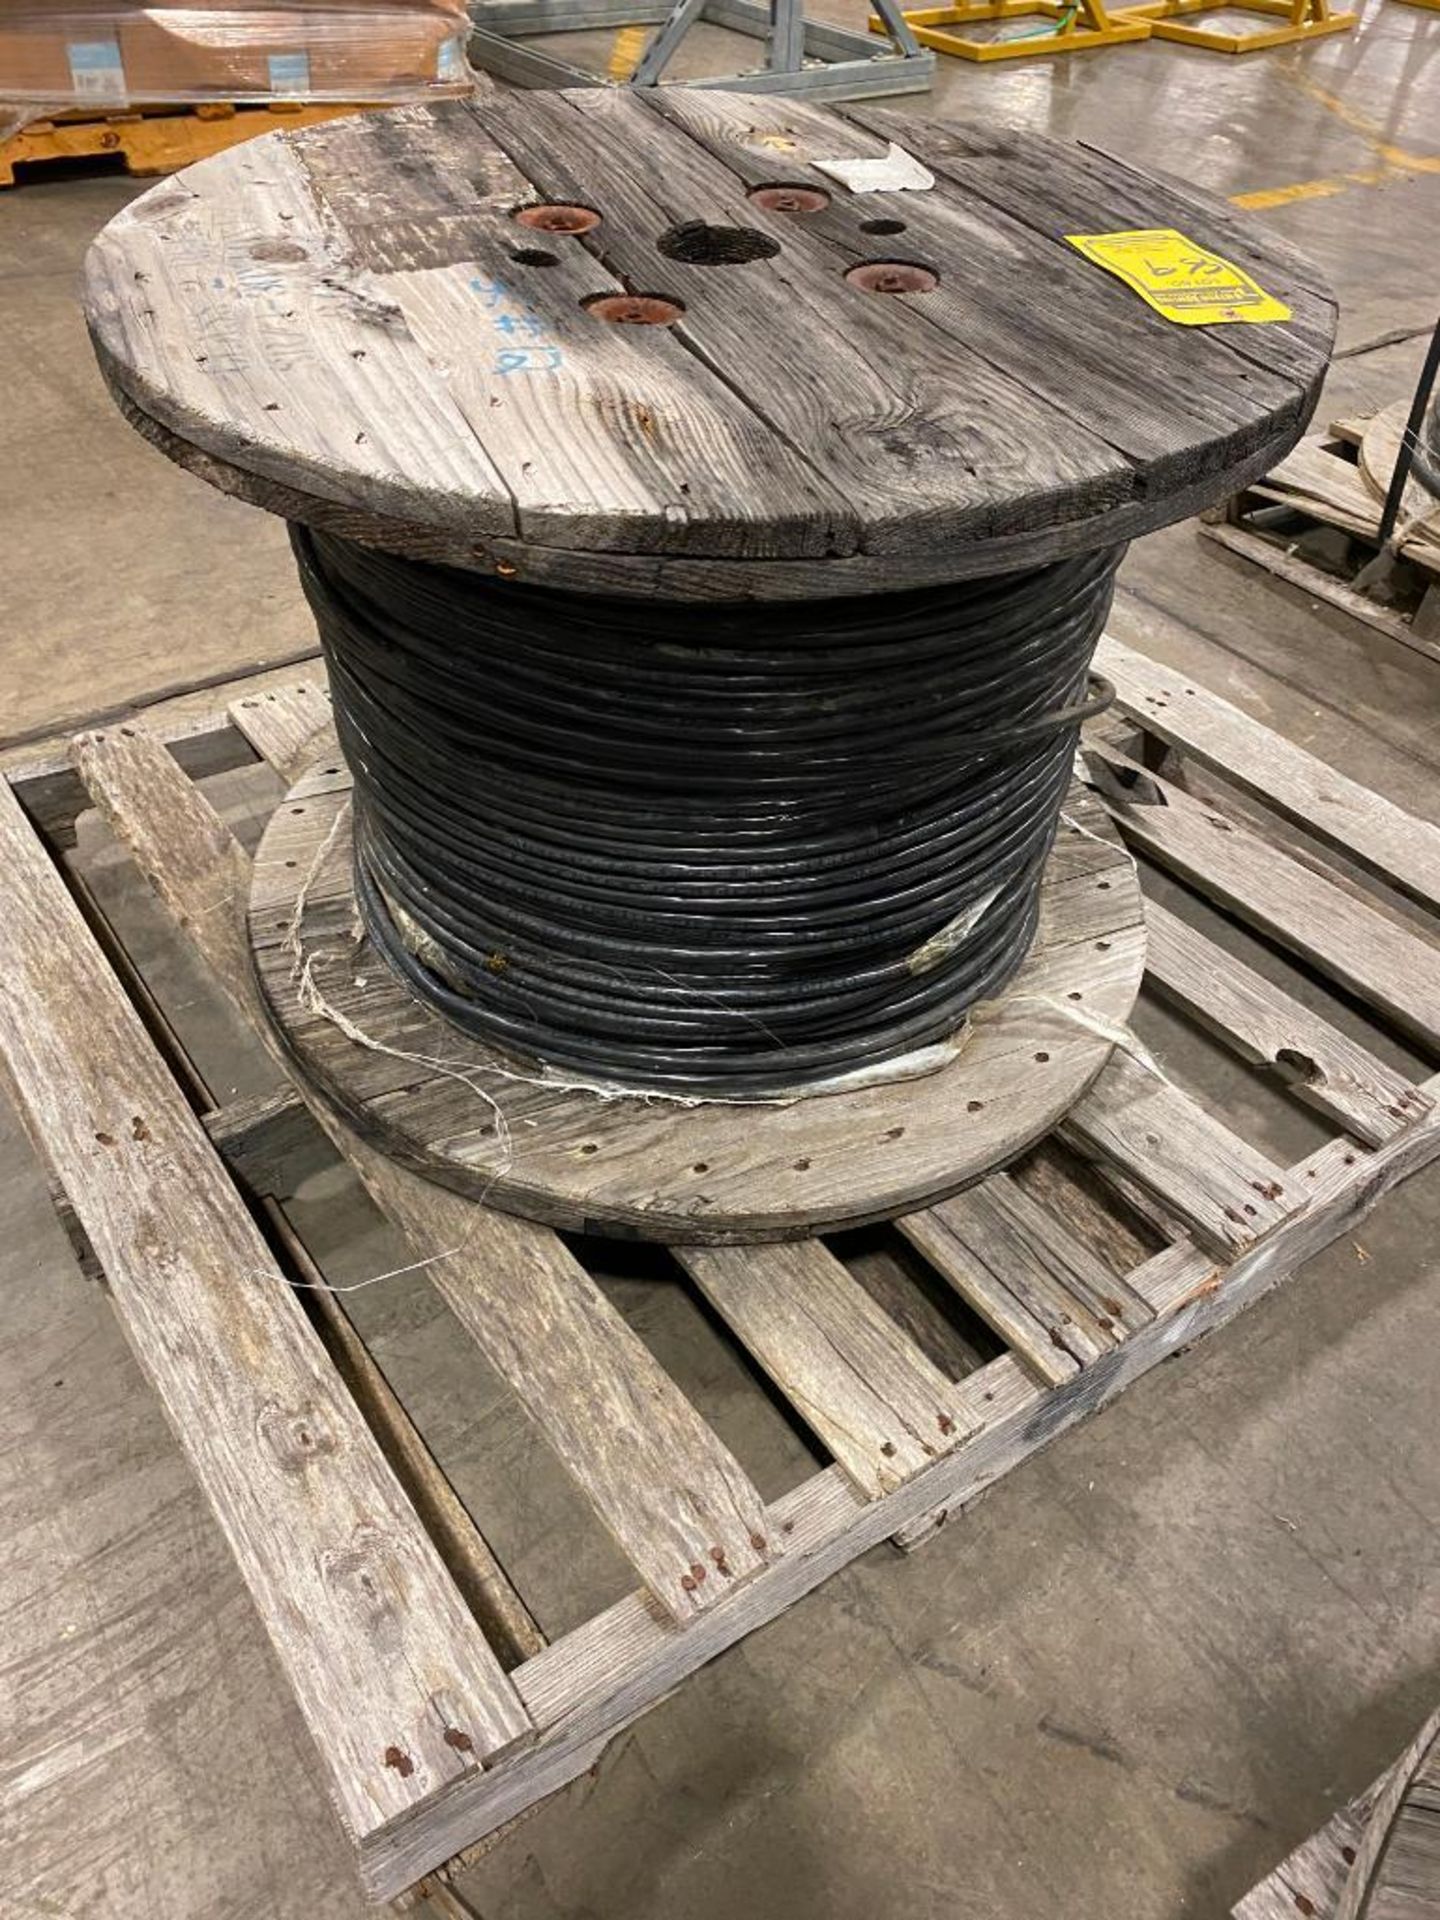 Spool of 3-Strand Electrical Wire - Image 4 of 6